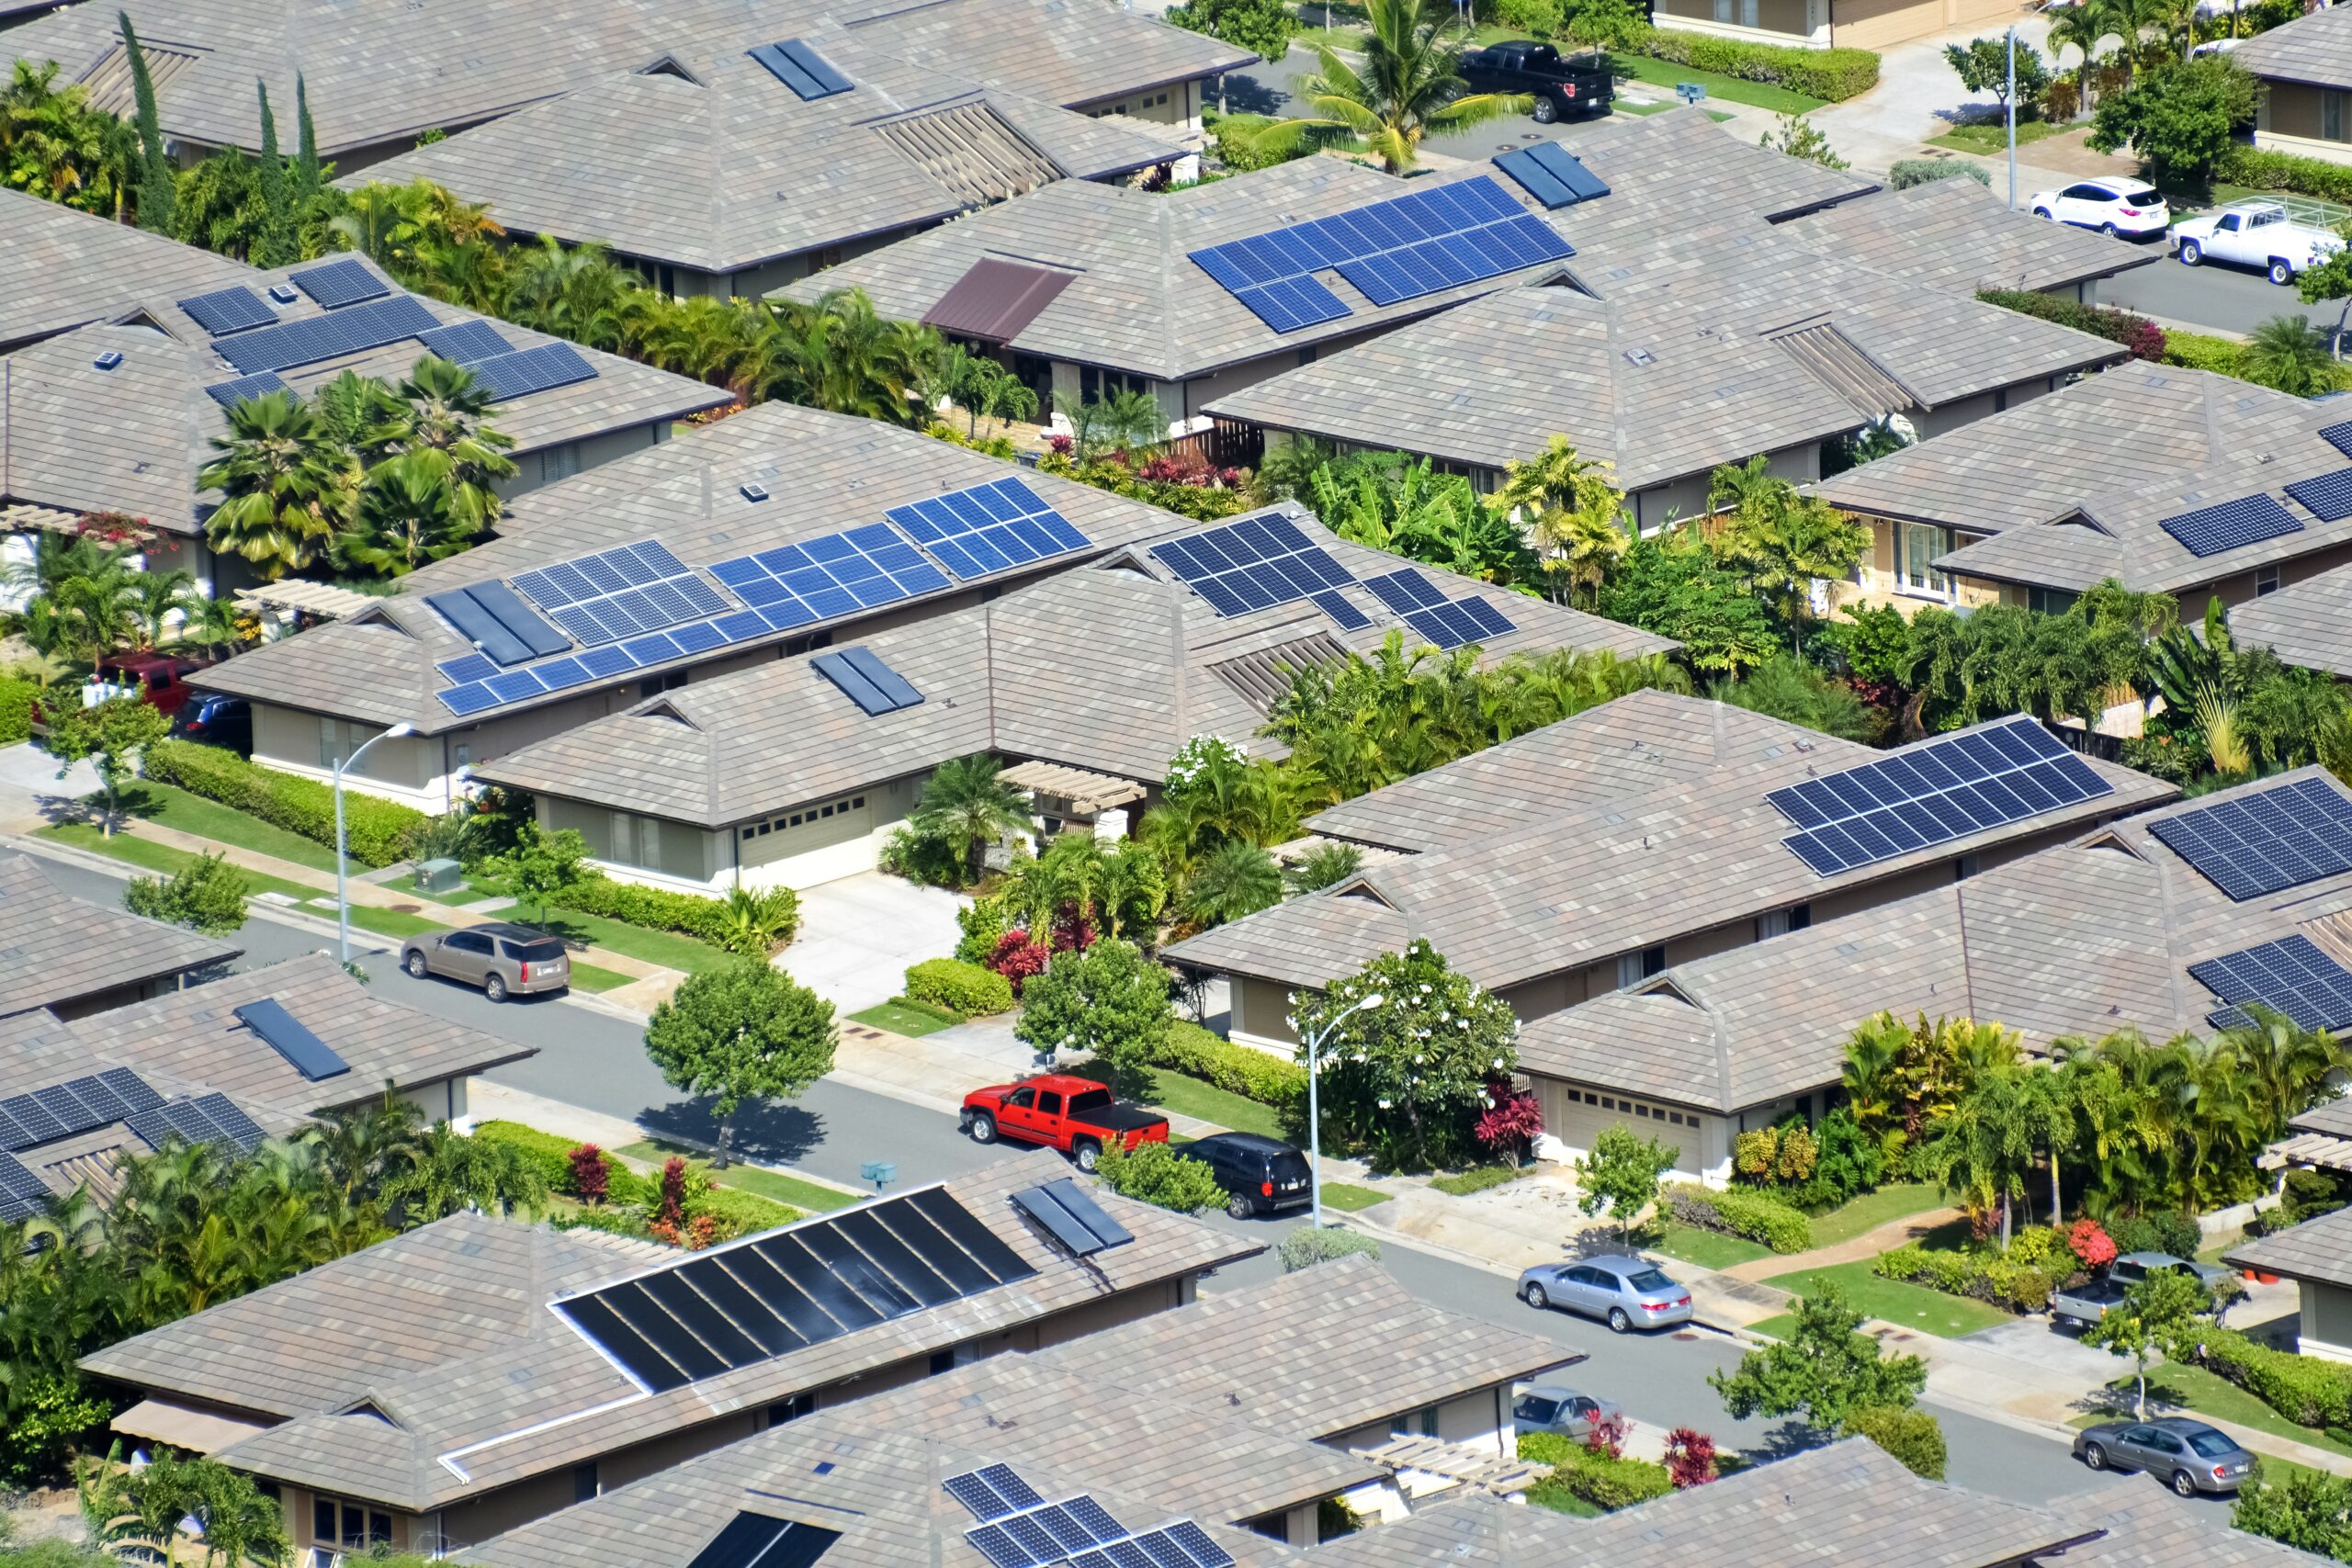 Solar Panels installed on Homes in San Diego California! 